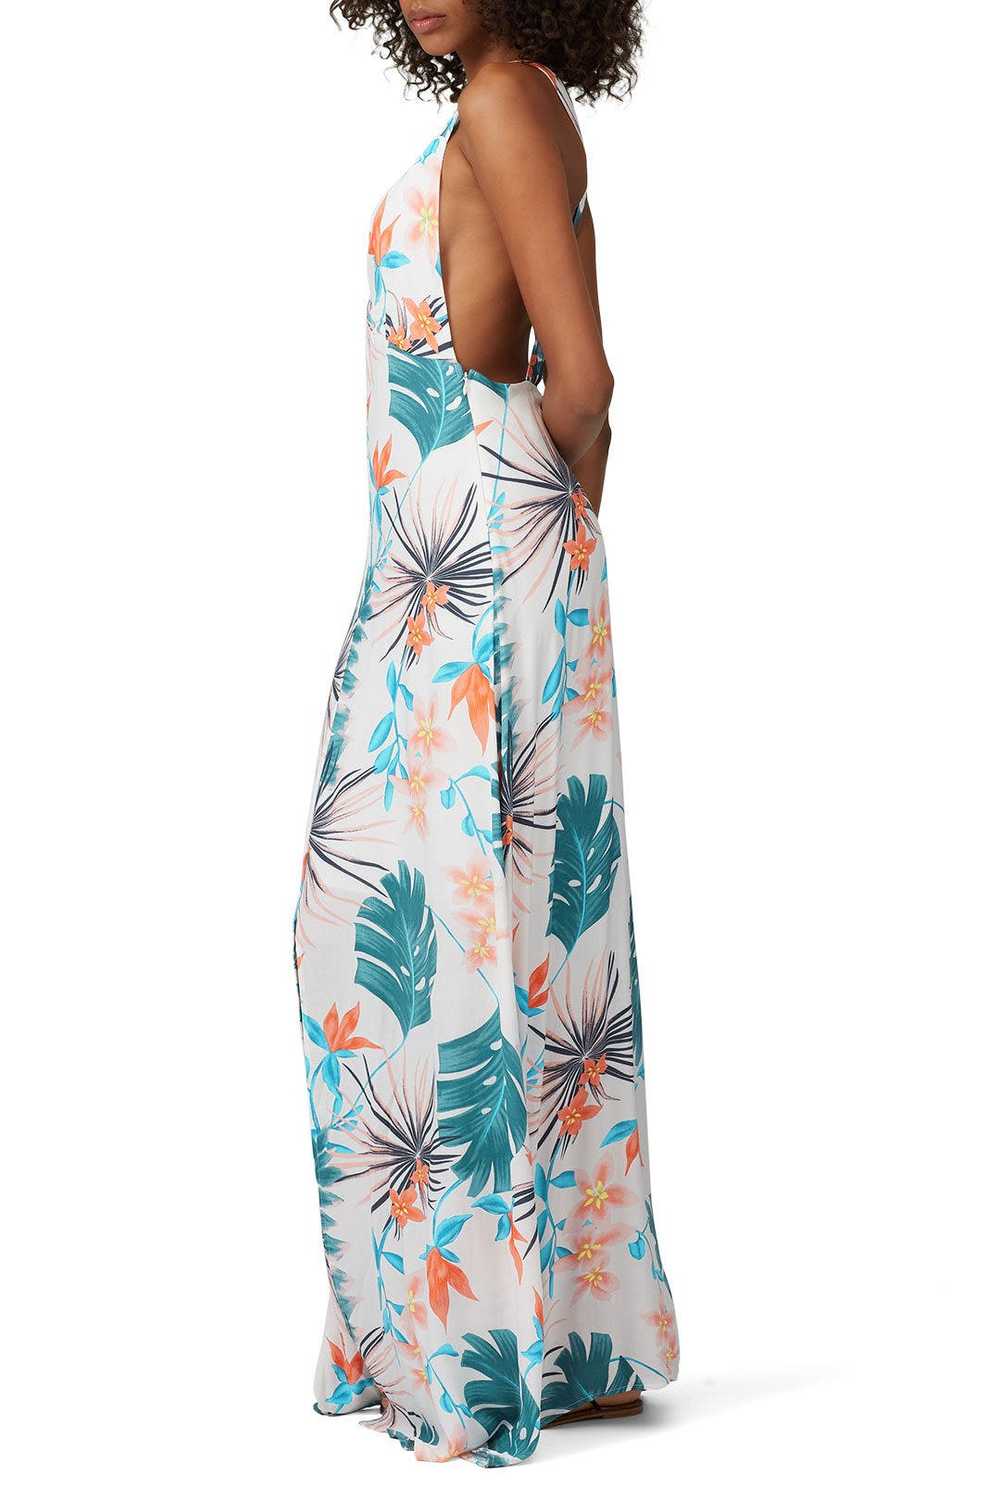 Slate & Willow Palm Printed Maxi - image 2